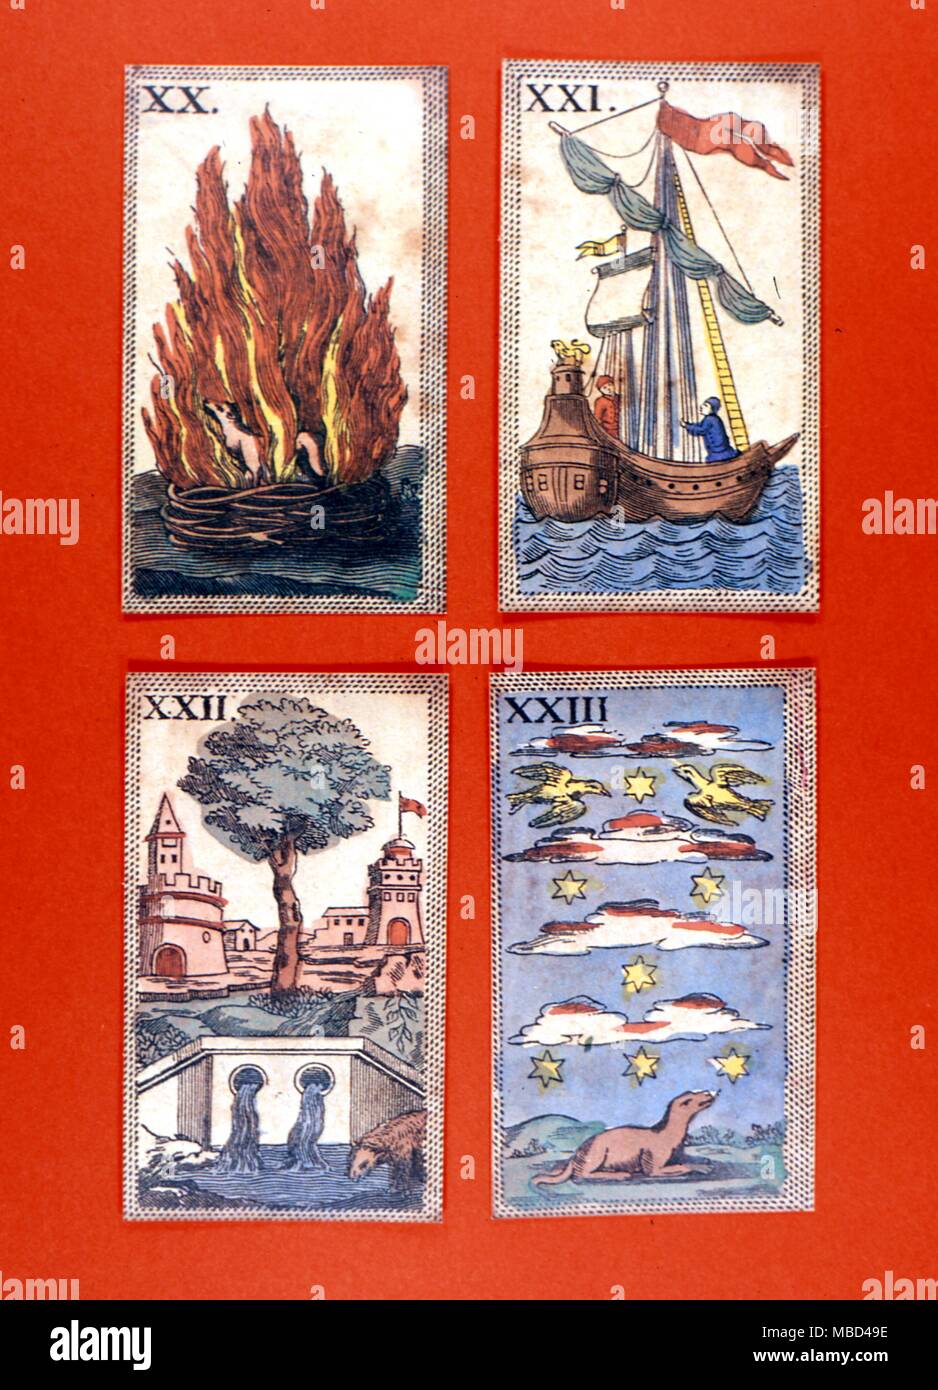 Elements and elementals - representation of the Four Elements - XX Fire: XXI Water: XXXII Earth and XXIII Air. Symbol cards from the Minchiate pack (a Tarocchi game) of the eighteenth century. - ©Charles Walker / Stock Photo